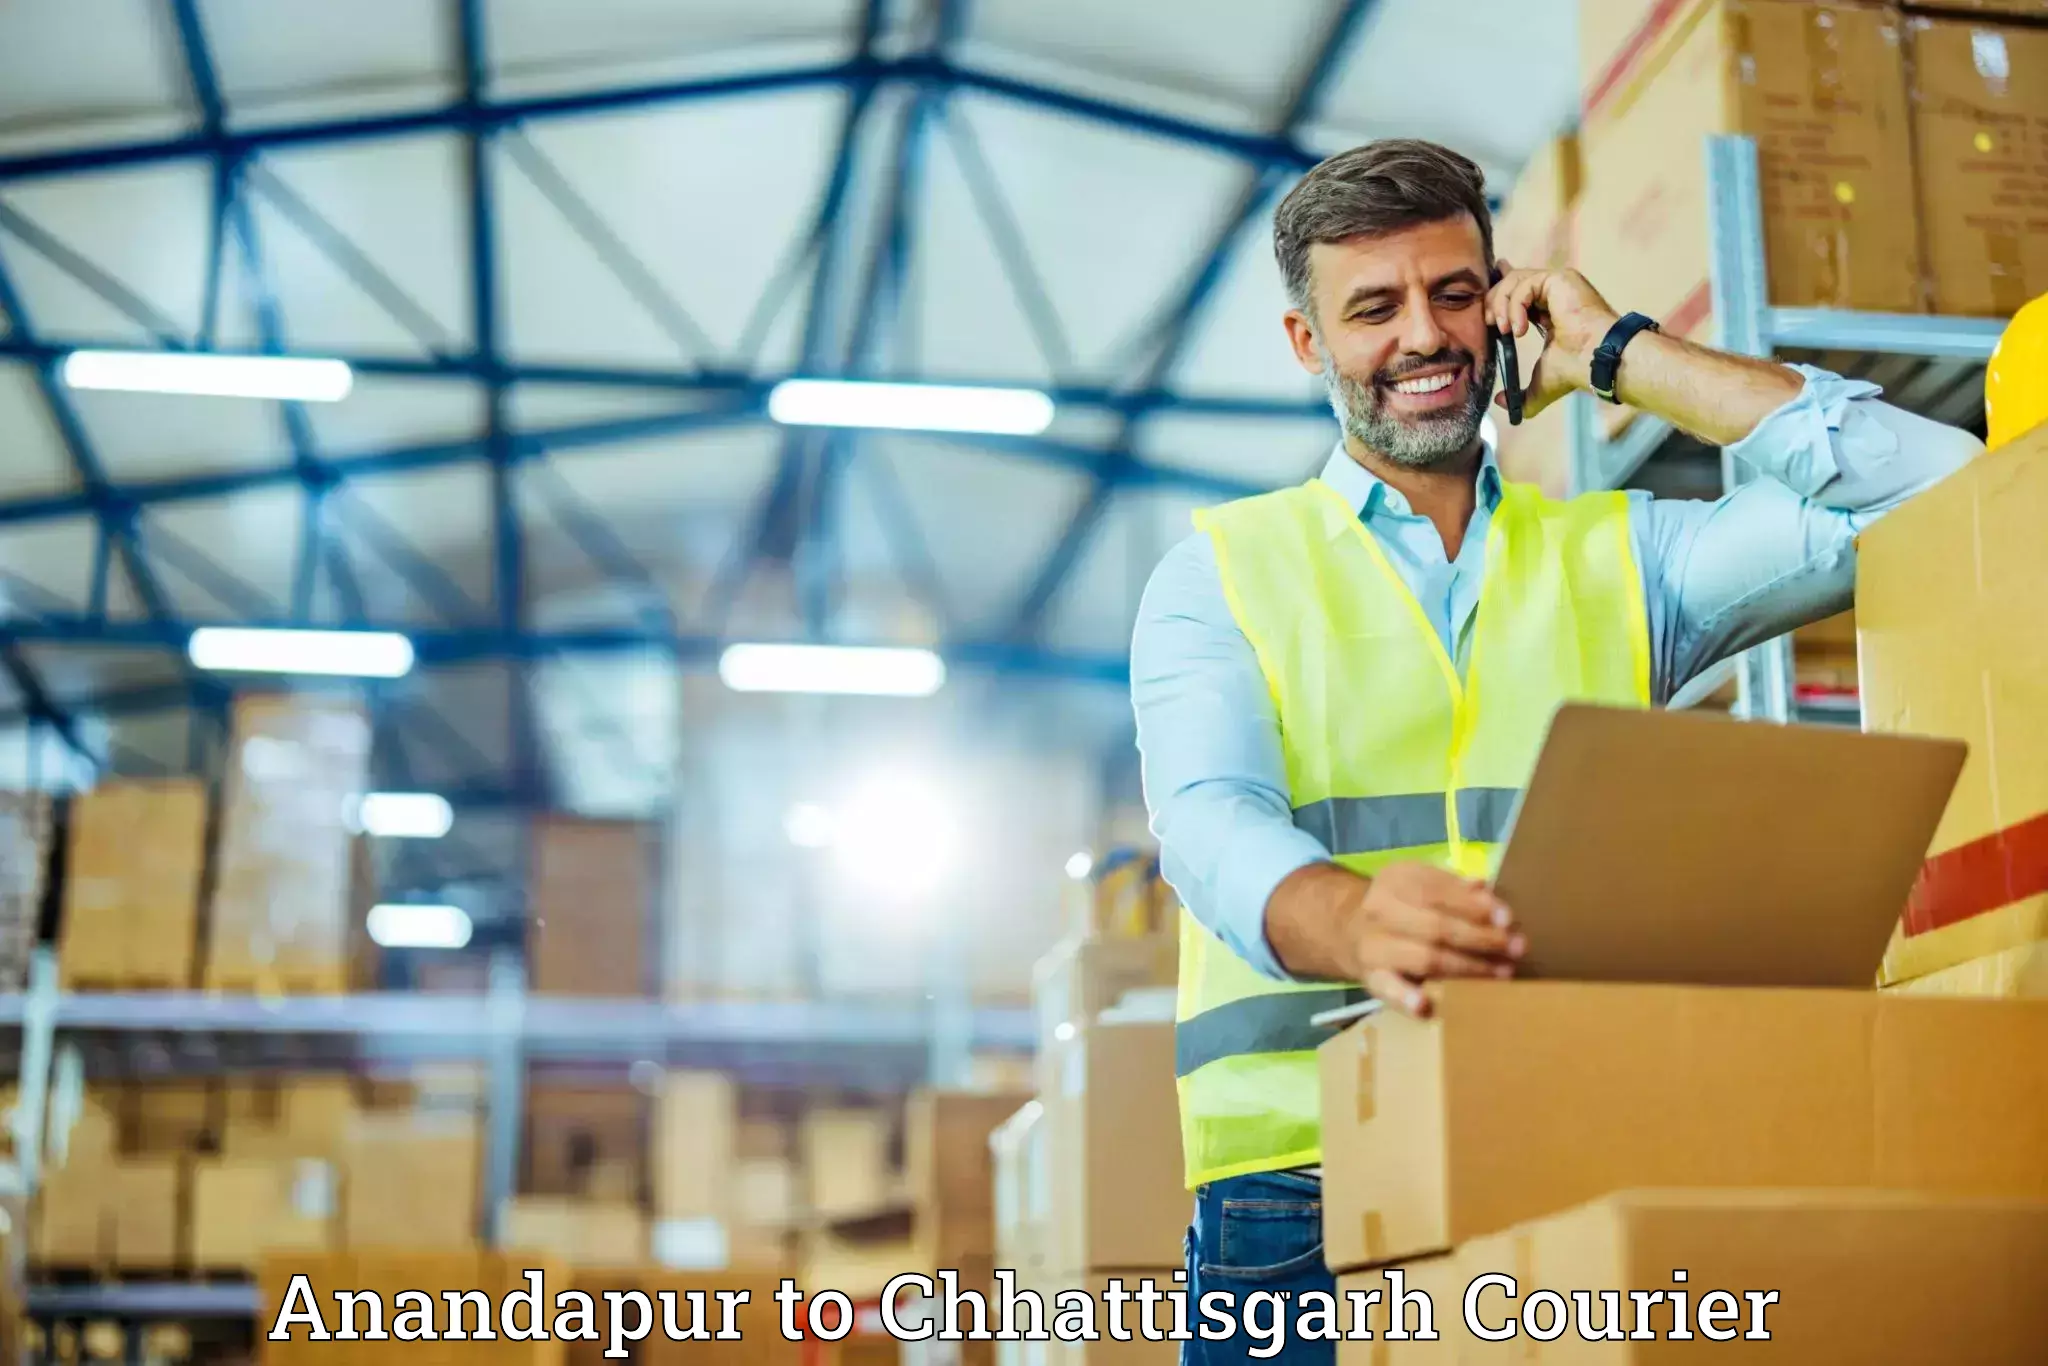 Quality moving and storage in Anandapur to Pratappur